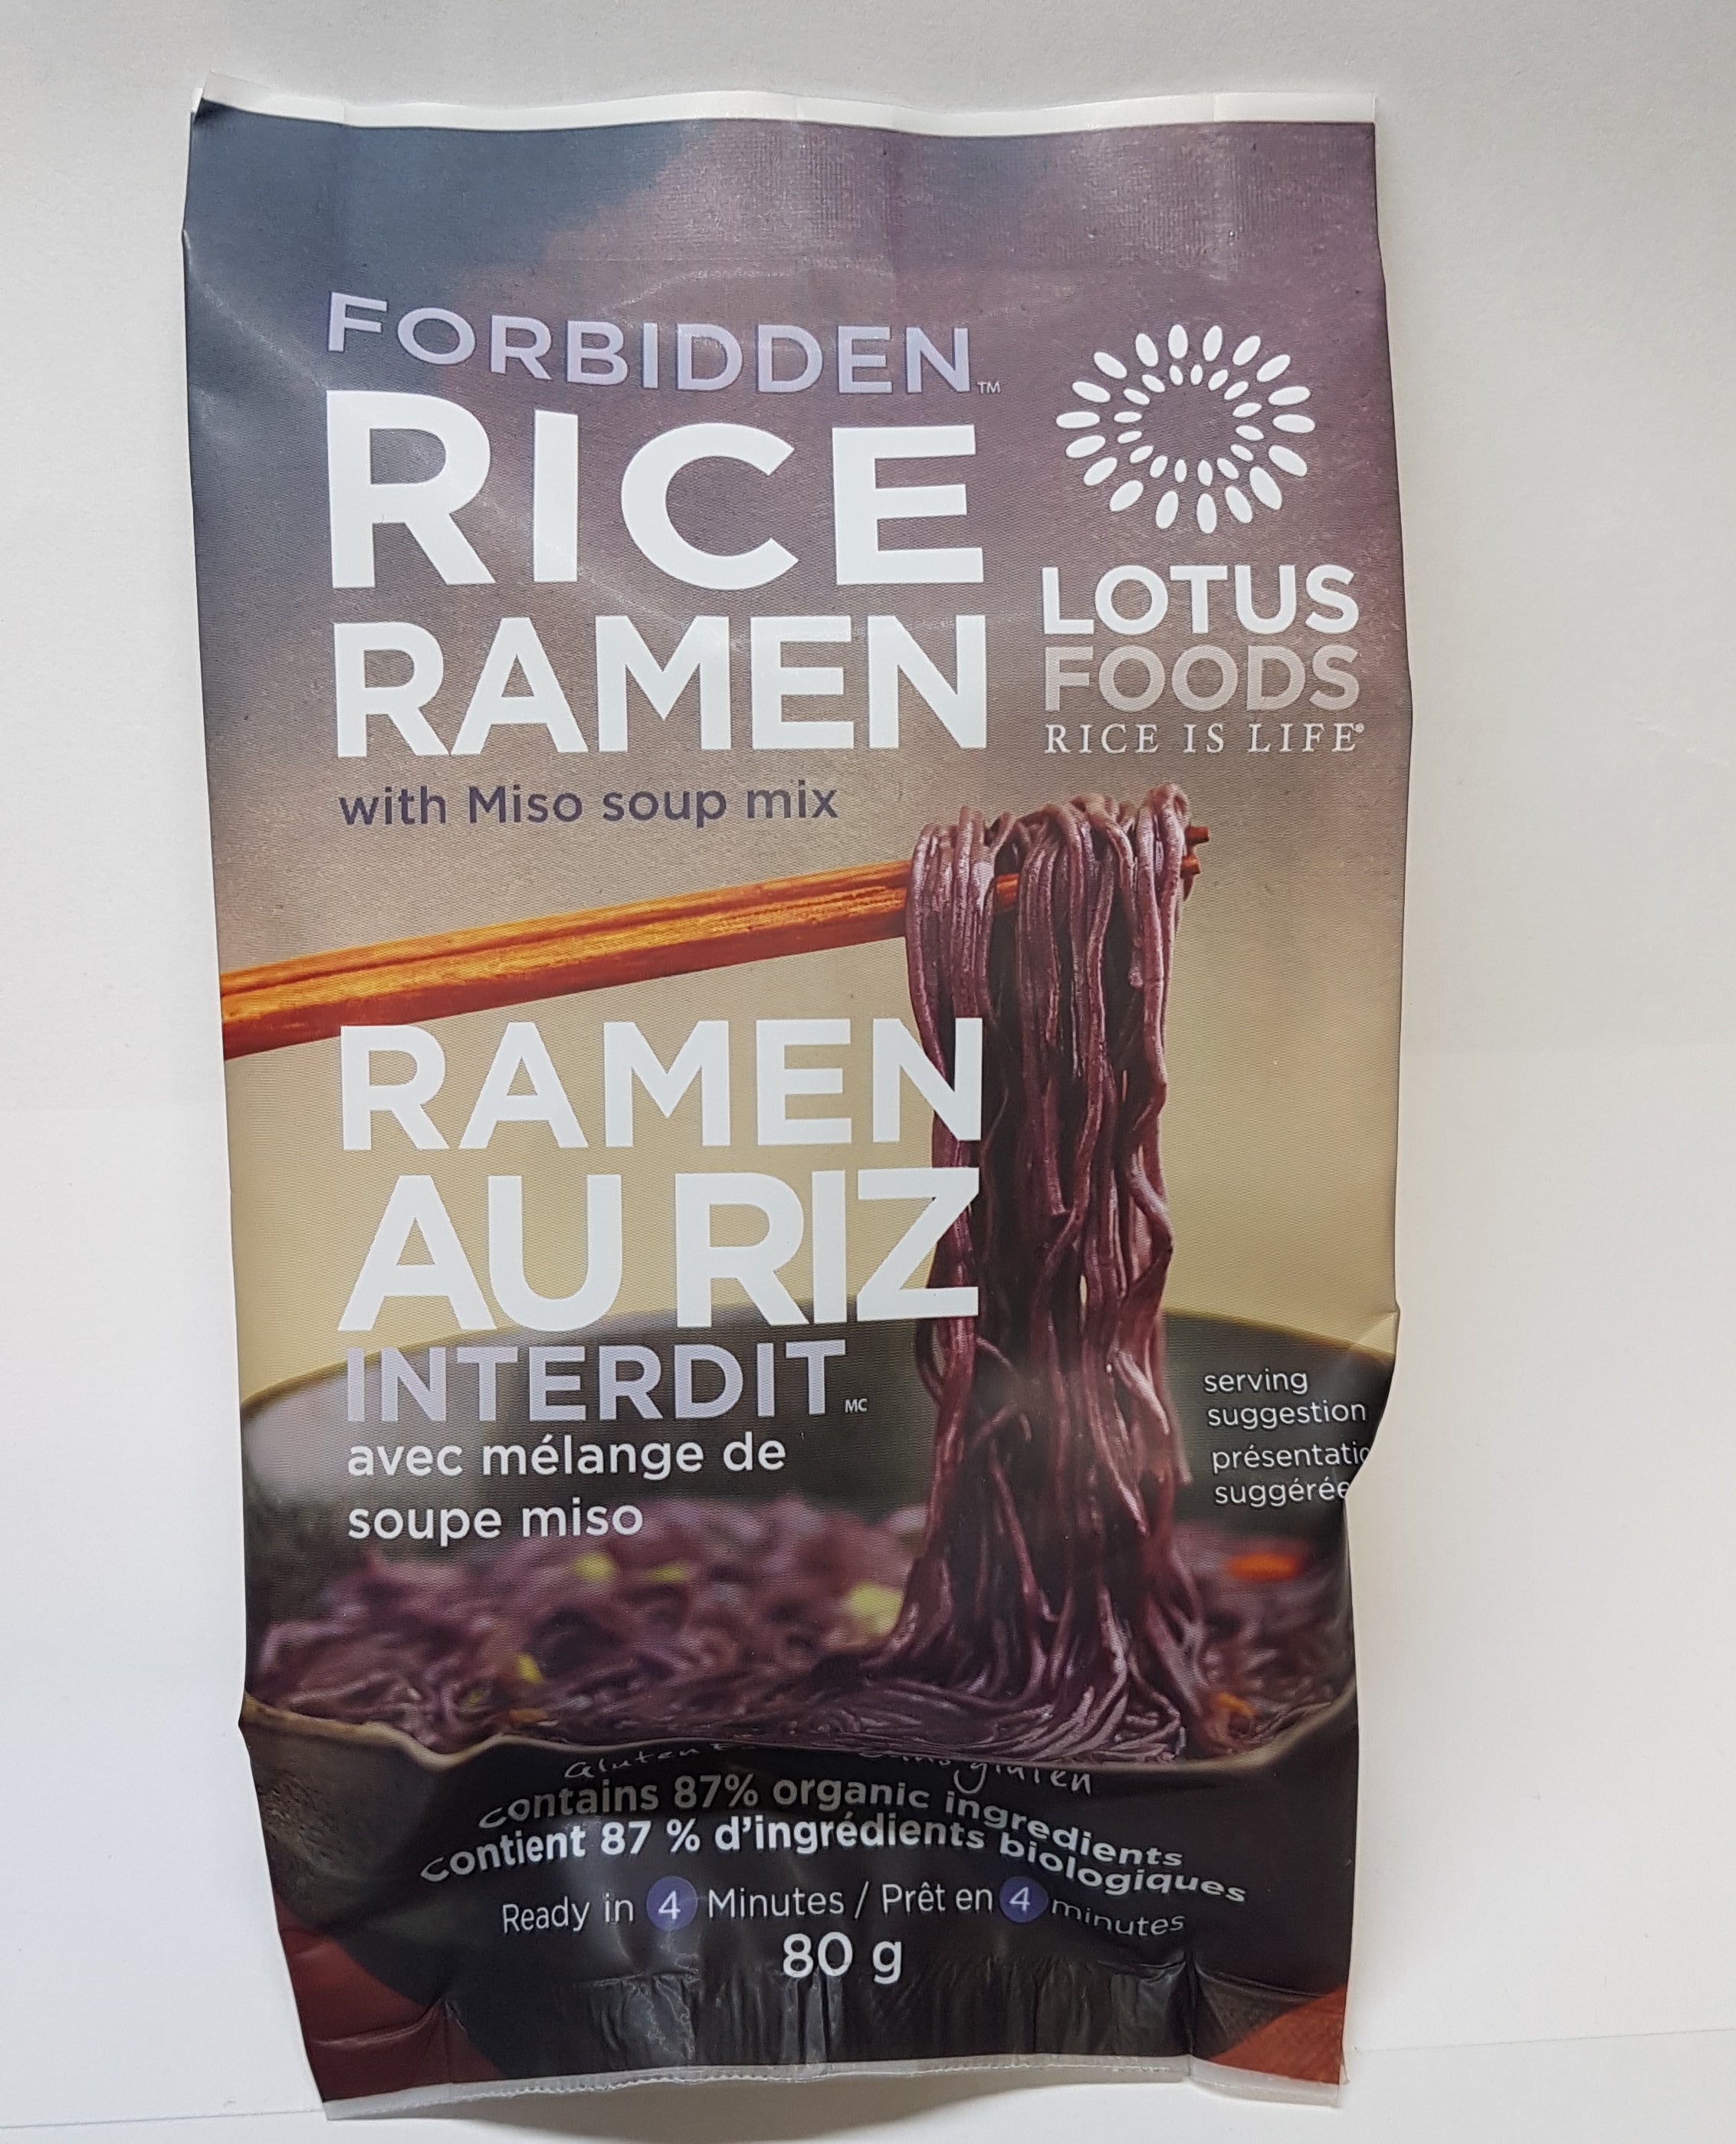 Lotus Foods Forbidden Rice Ramen with Miso Soup (80g) - Lifestyle Markets